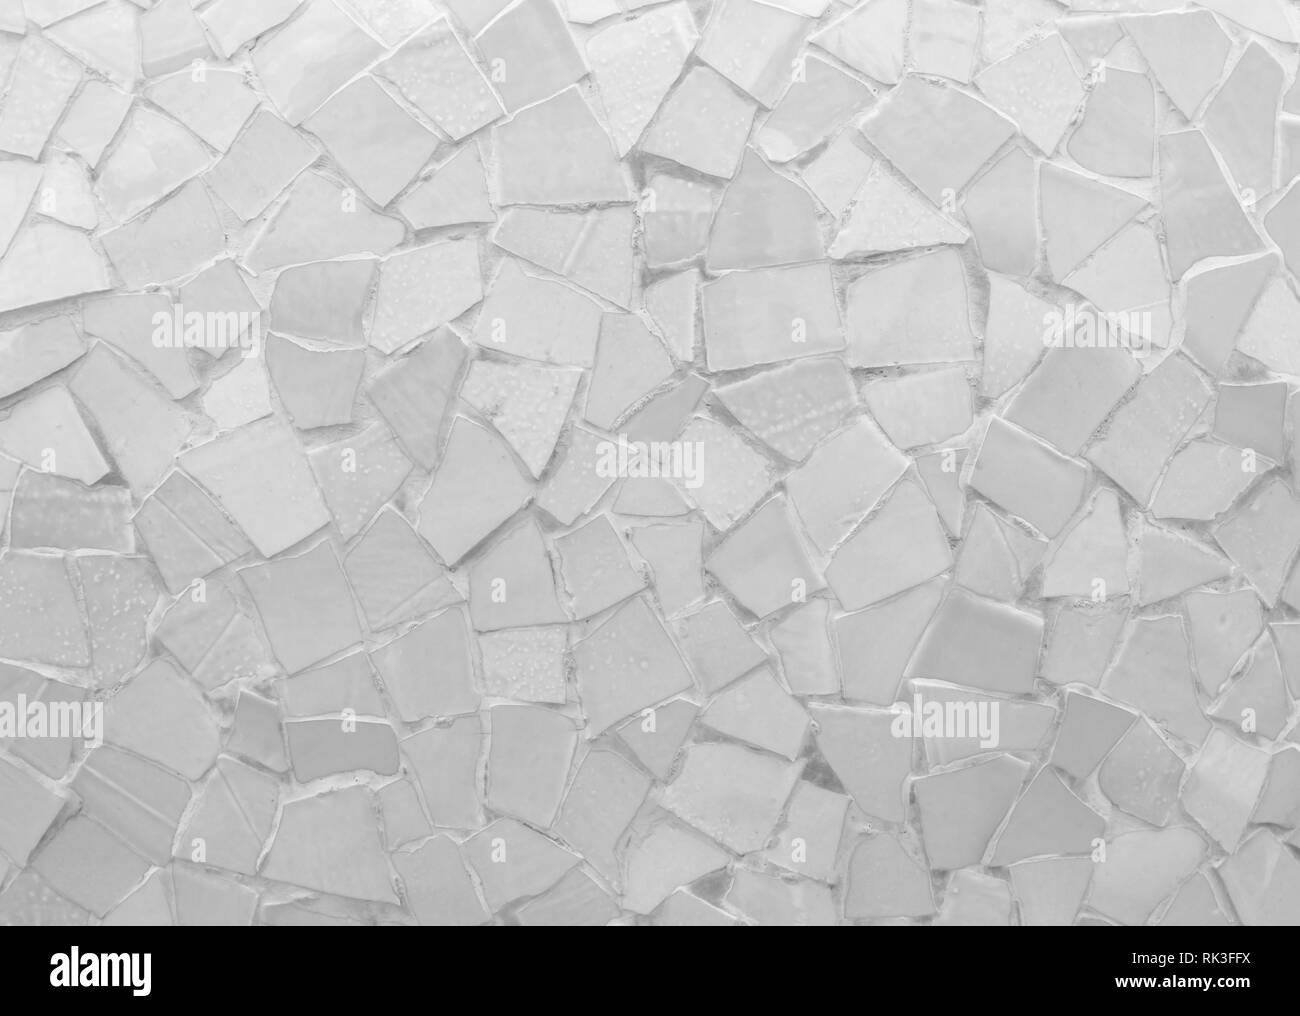 Broken tiles mosaic seamless pattern. White and Grey the tile wall high resolution real photo or brick seamless and texture interior background. Stock Photo